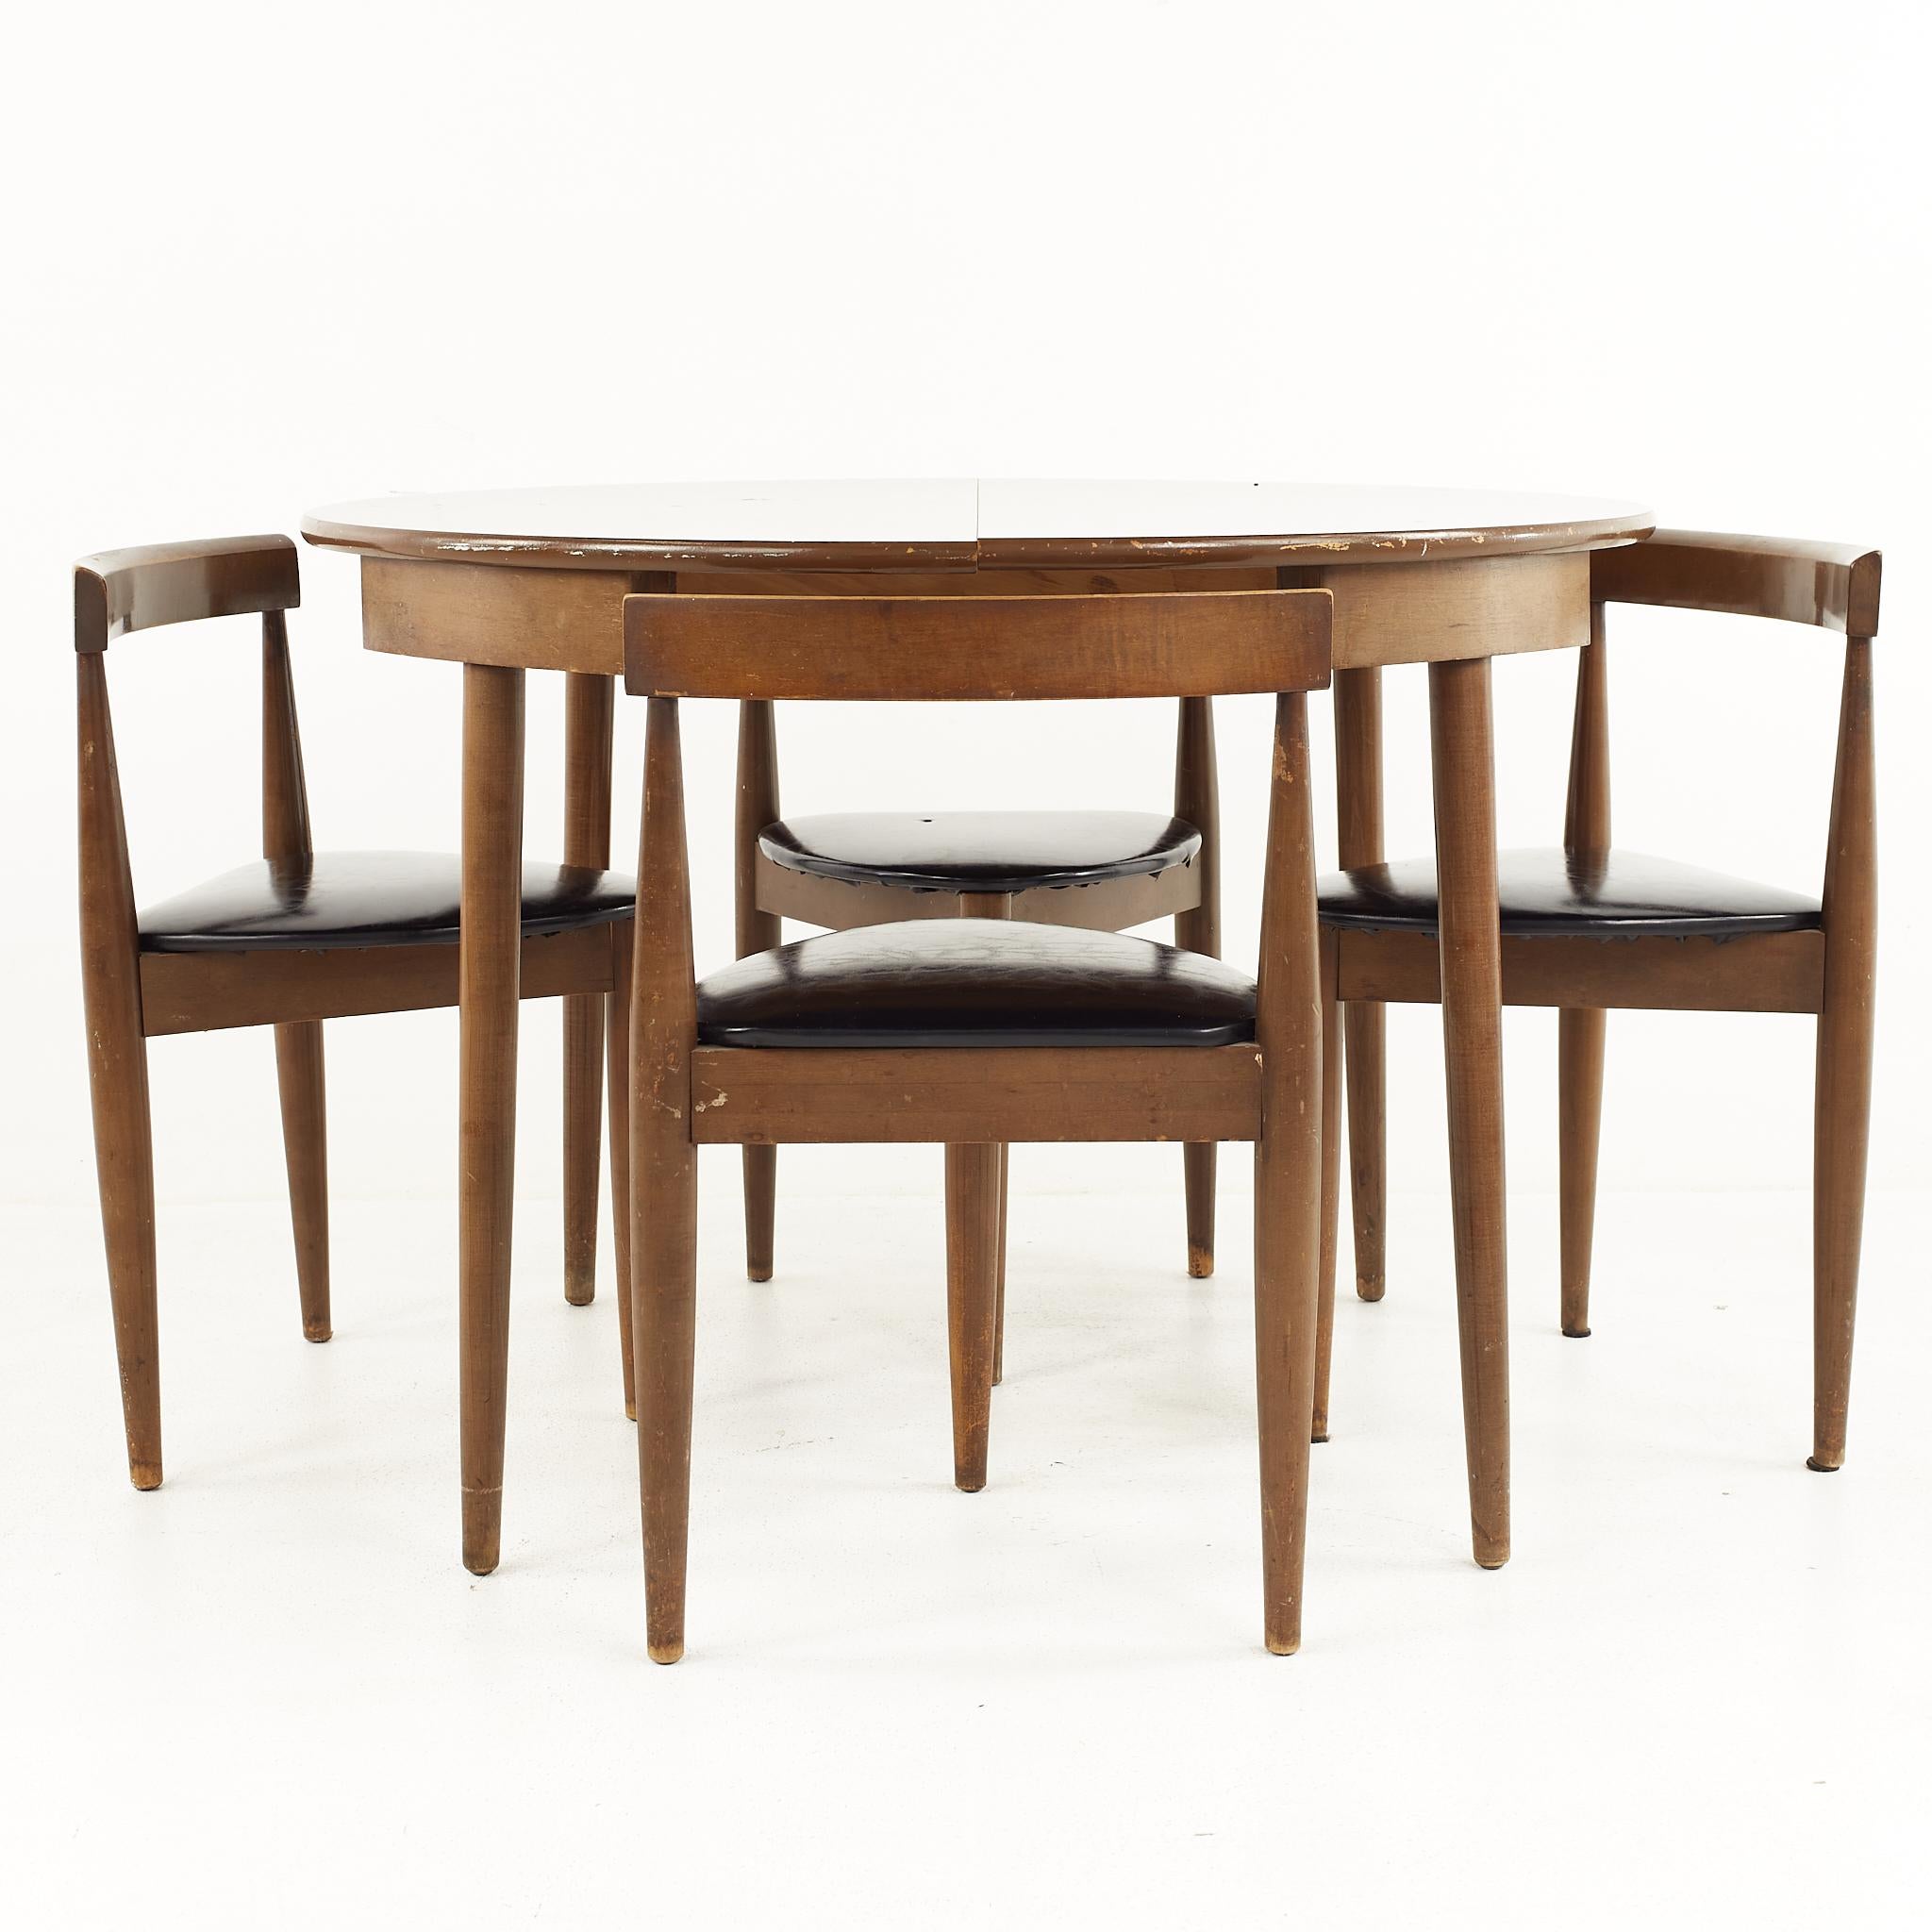 Mid-Century Modern Hans Olsen Style Walnut and Laminate Dining Table with 4 Nesting Chairs